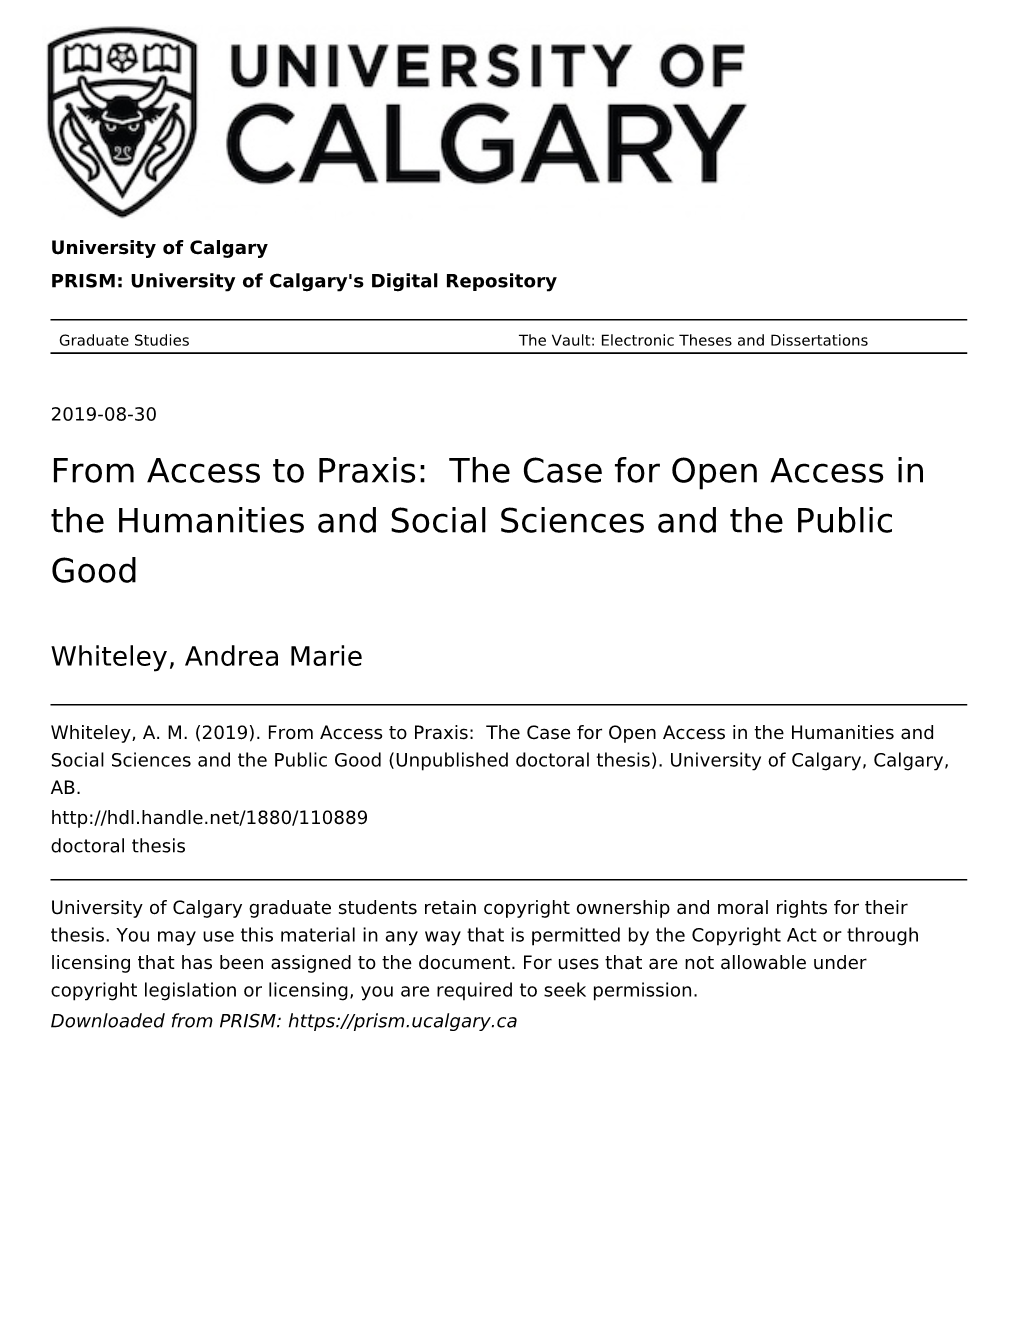 From Access to Praxis: the Case for Open Access in the Humanities and Social Sciences and the Public Good